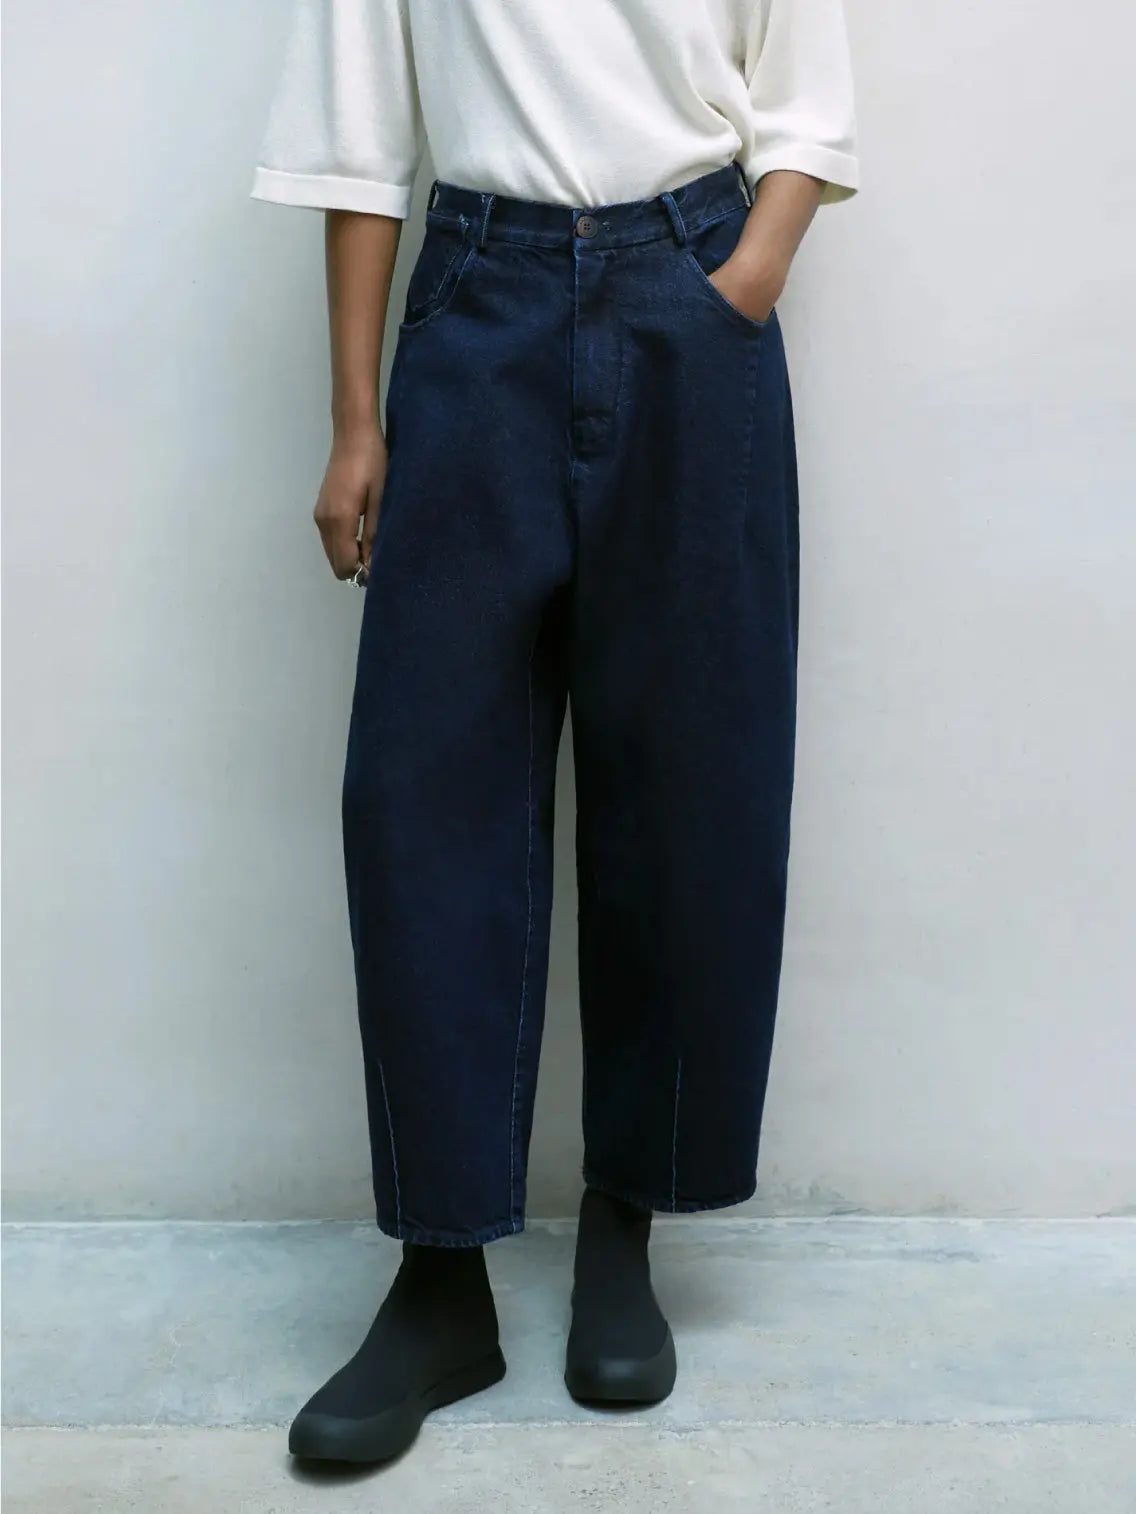 A pair of dark blue, high-waisted Denim Baggy Pants by Cordera with a relaxed, wide-leg fit. The pants feature side pockets, front zipper closure, and contrast stitching along the seams. Available at BassalStore in Barcelona, the fabric appears to have a slightly worn-in texture.